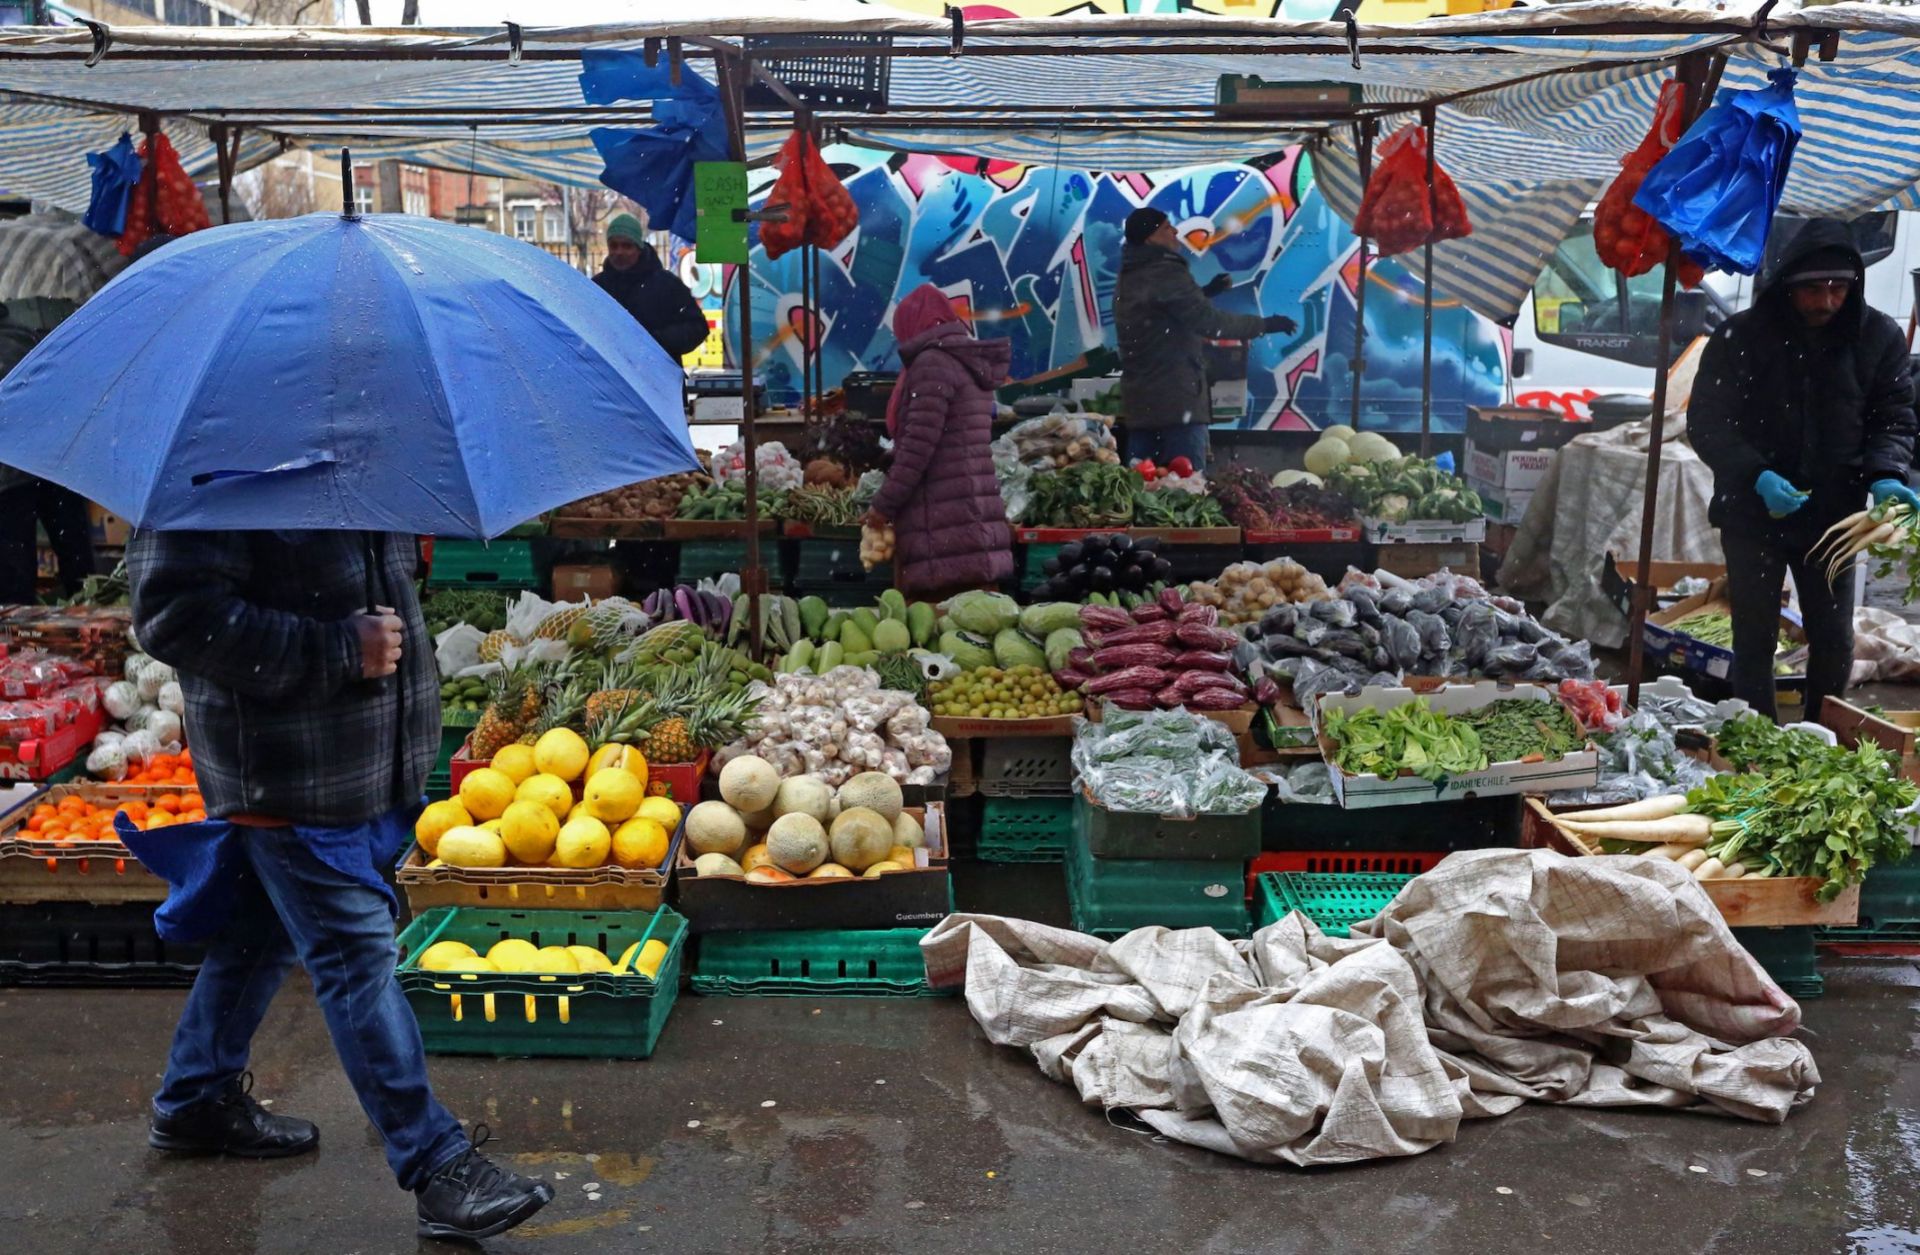 A pedestrian shelters from the rain as they walk past fruit and vegetables displayed for sale at a market in east London on March 31, 2023.